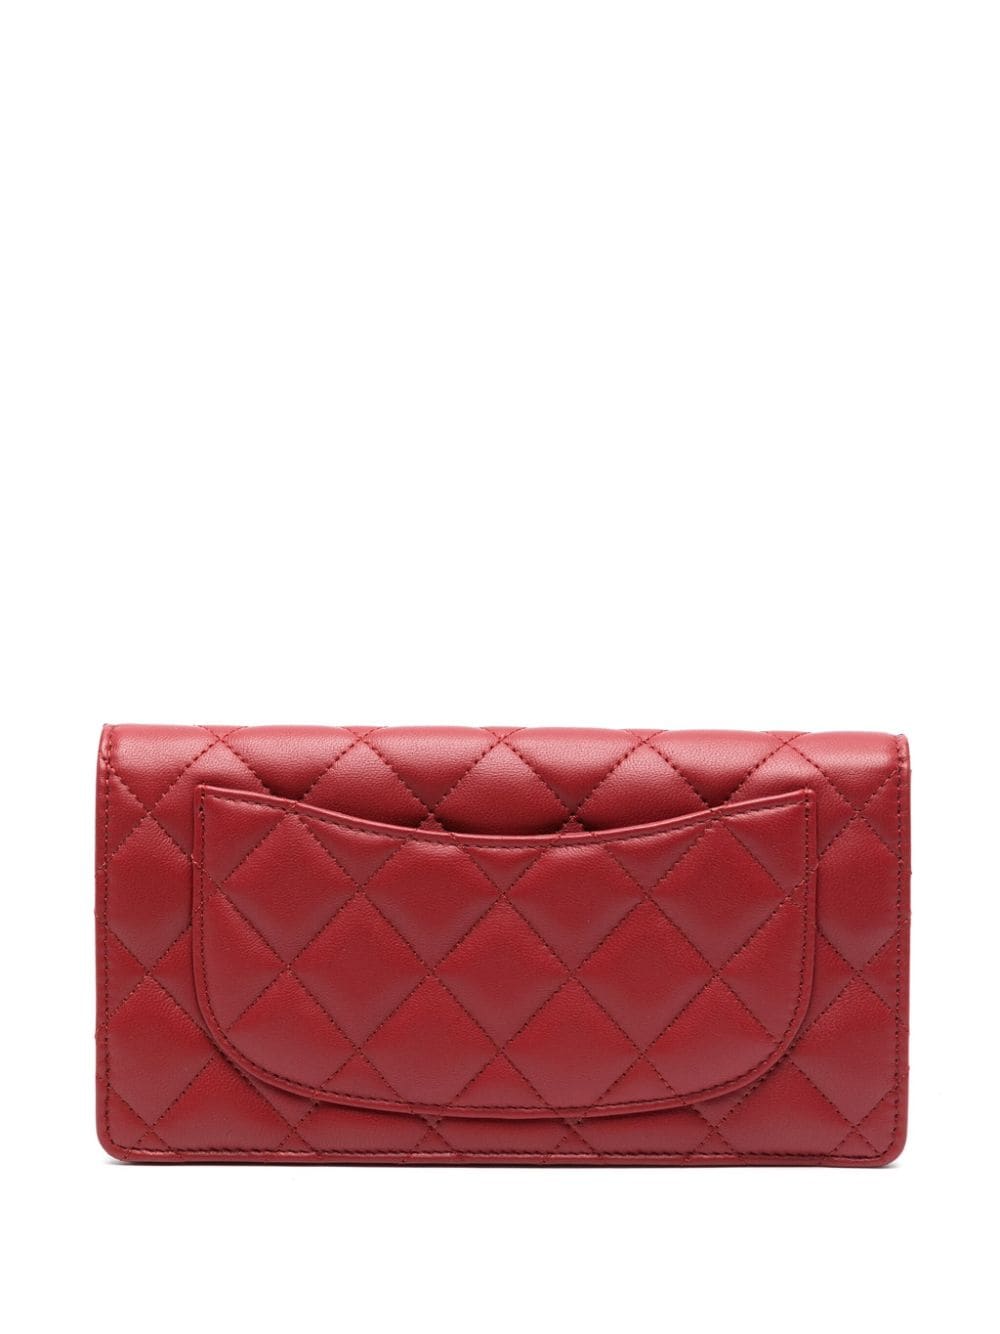 Pre-owned Chanel 菱形绗缝钱包（2012-2013年典藏款） In Red